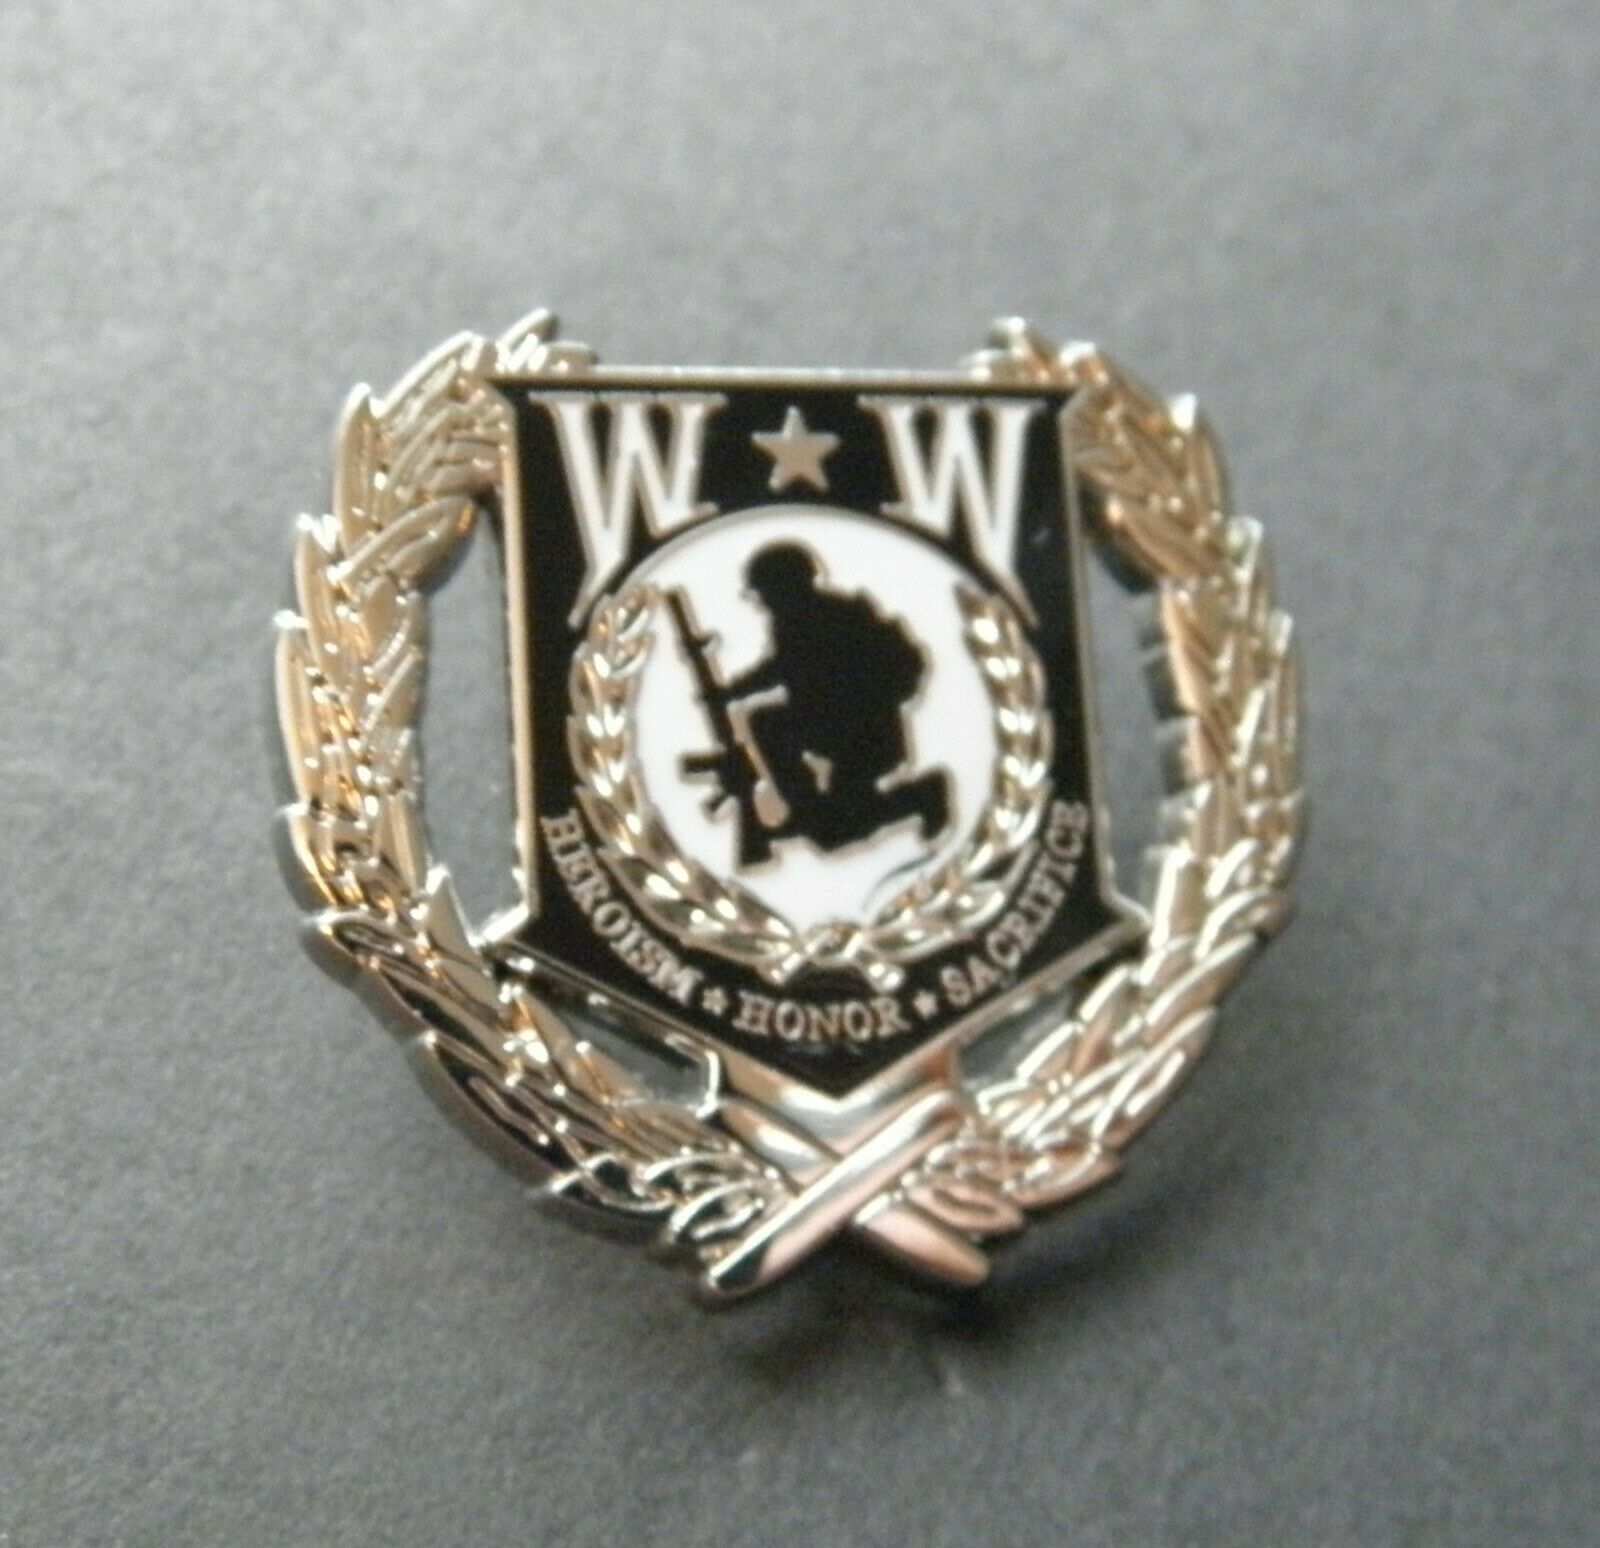 WOUNDED WARRIOR WREATH LAPEL PIN 1 INCH HEROISM HONOR SACRIFICE